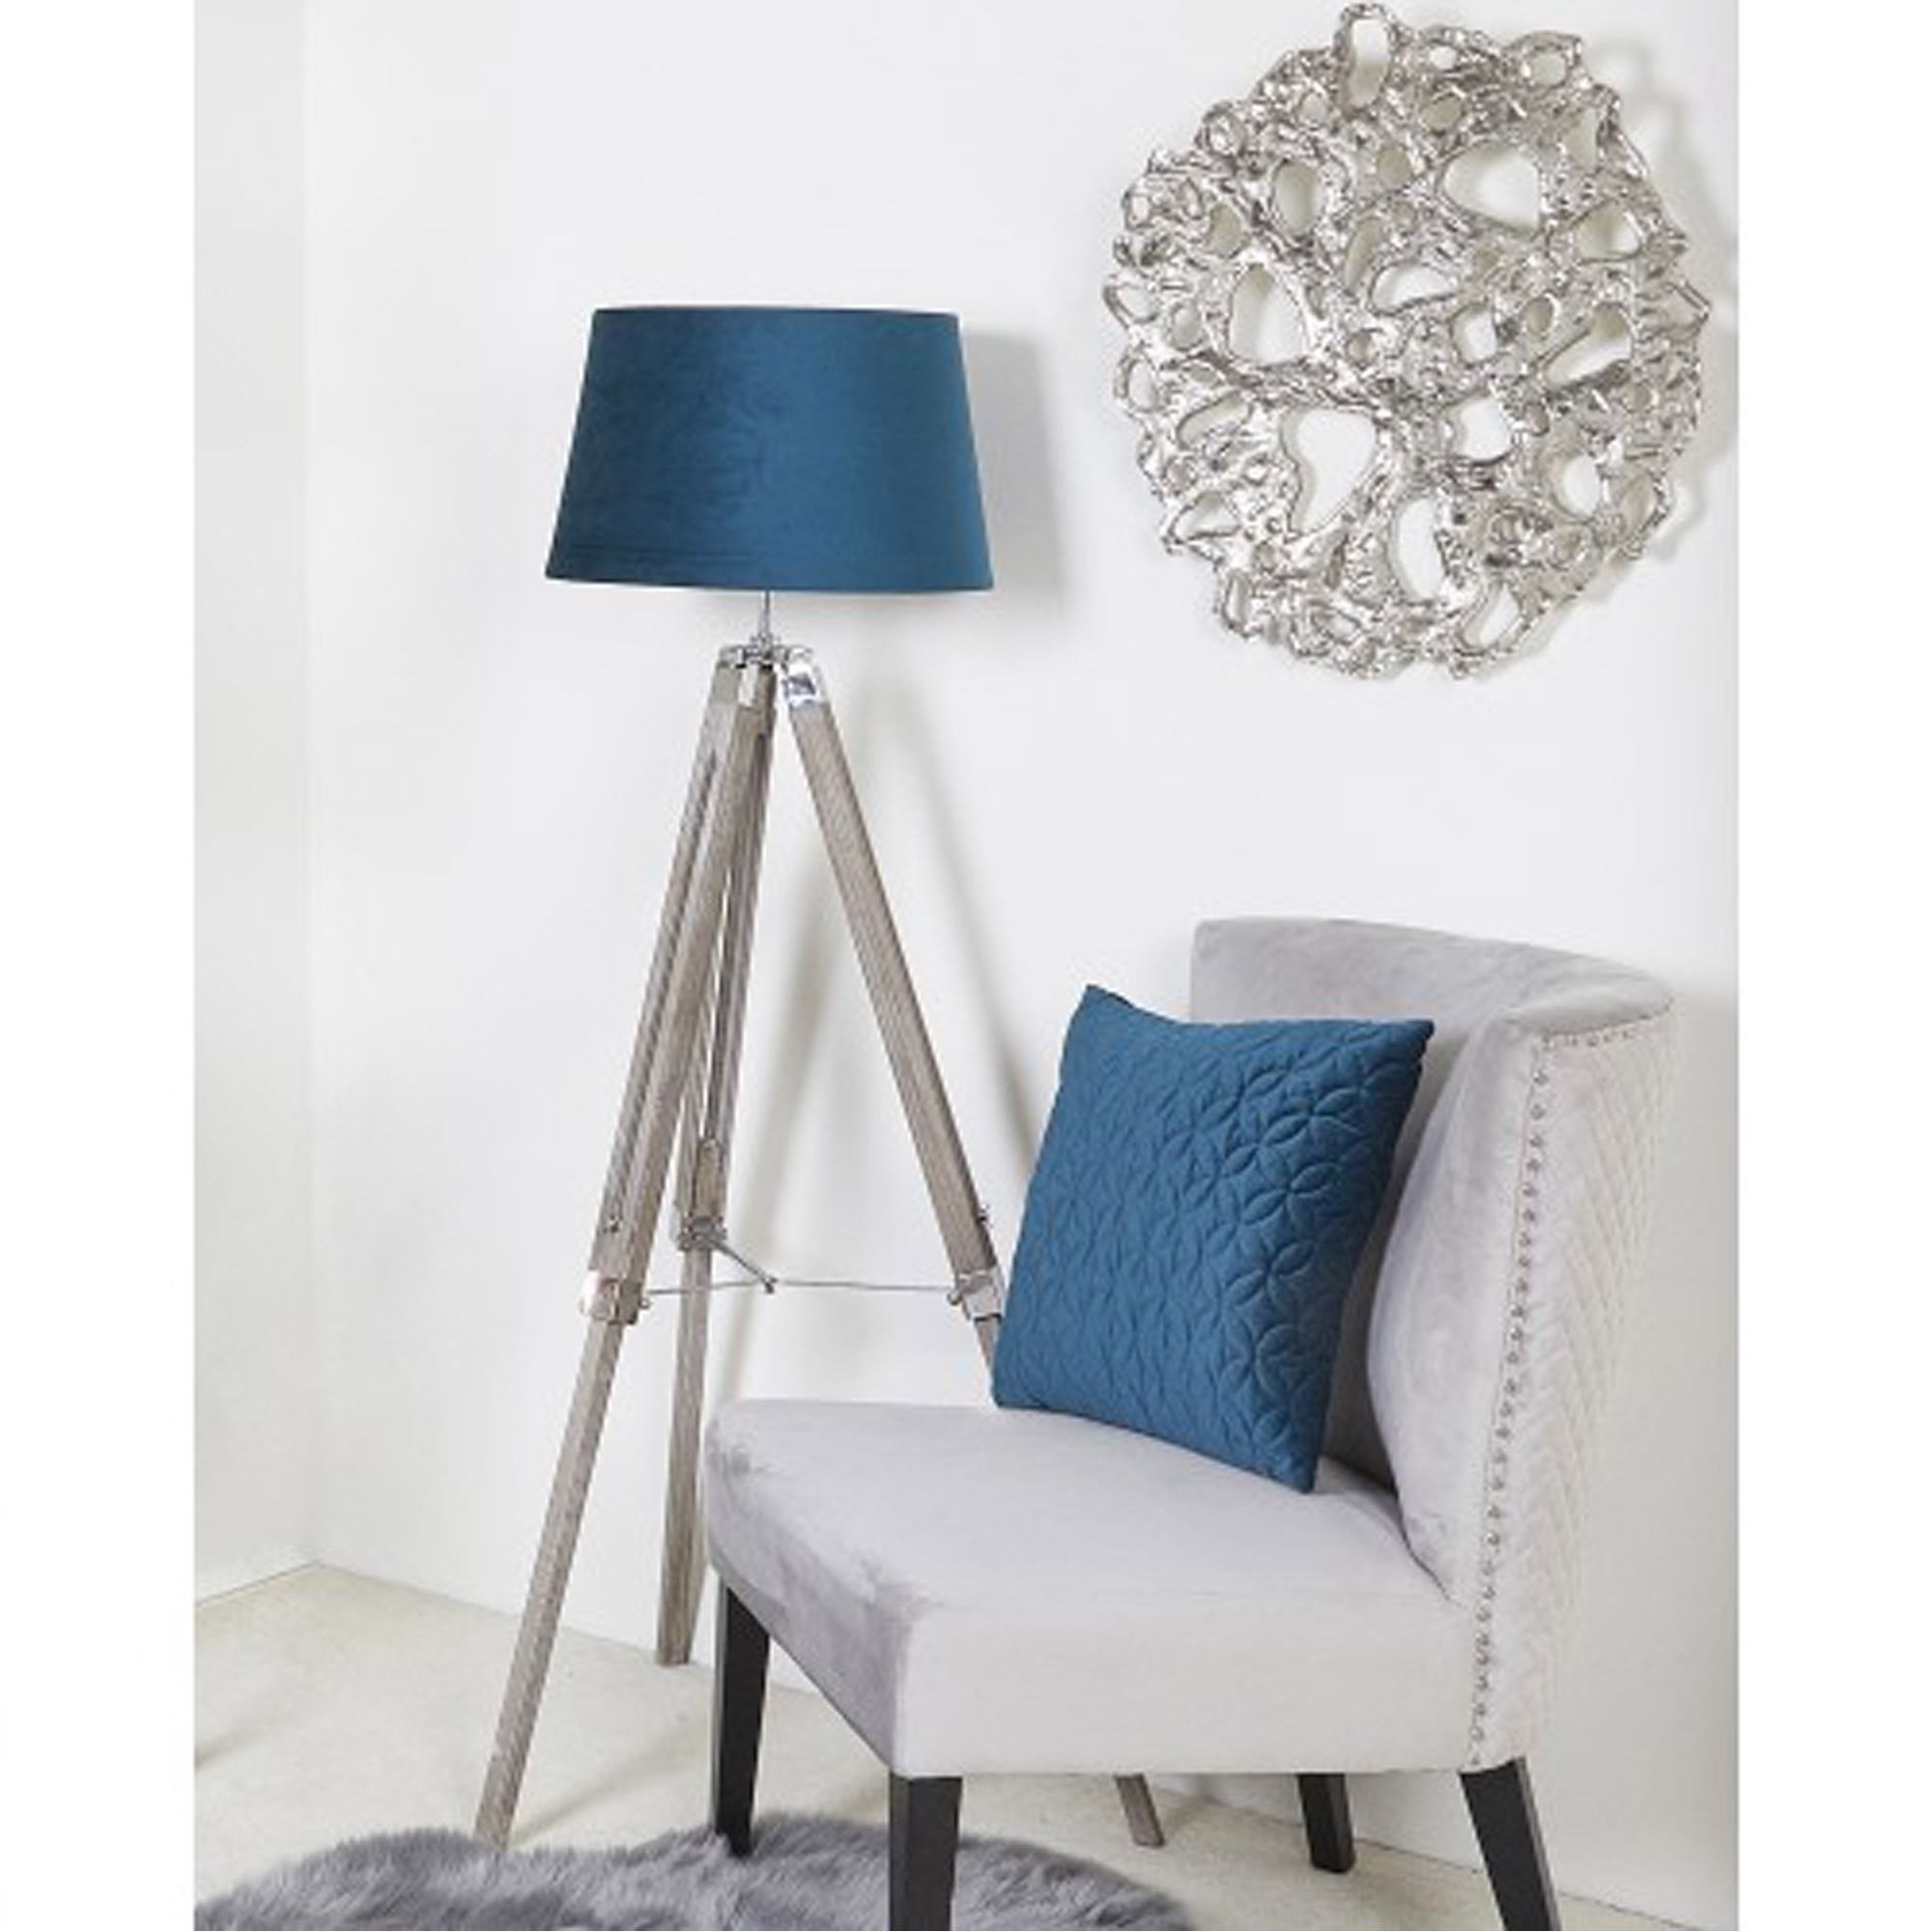 Wood Tripod Floor Lamp With Blue Shade (View 13 of 15)